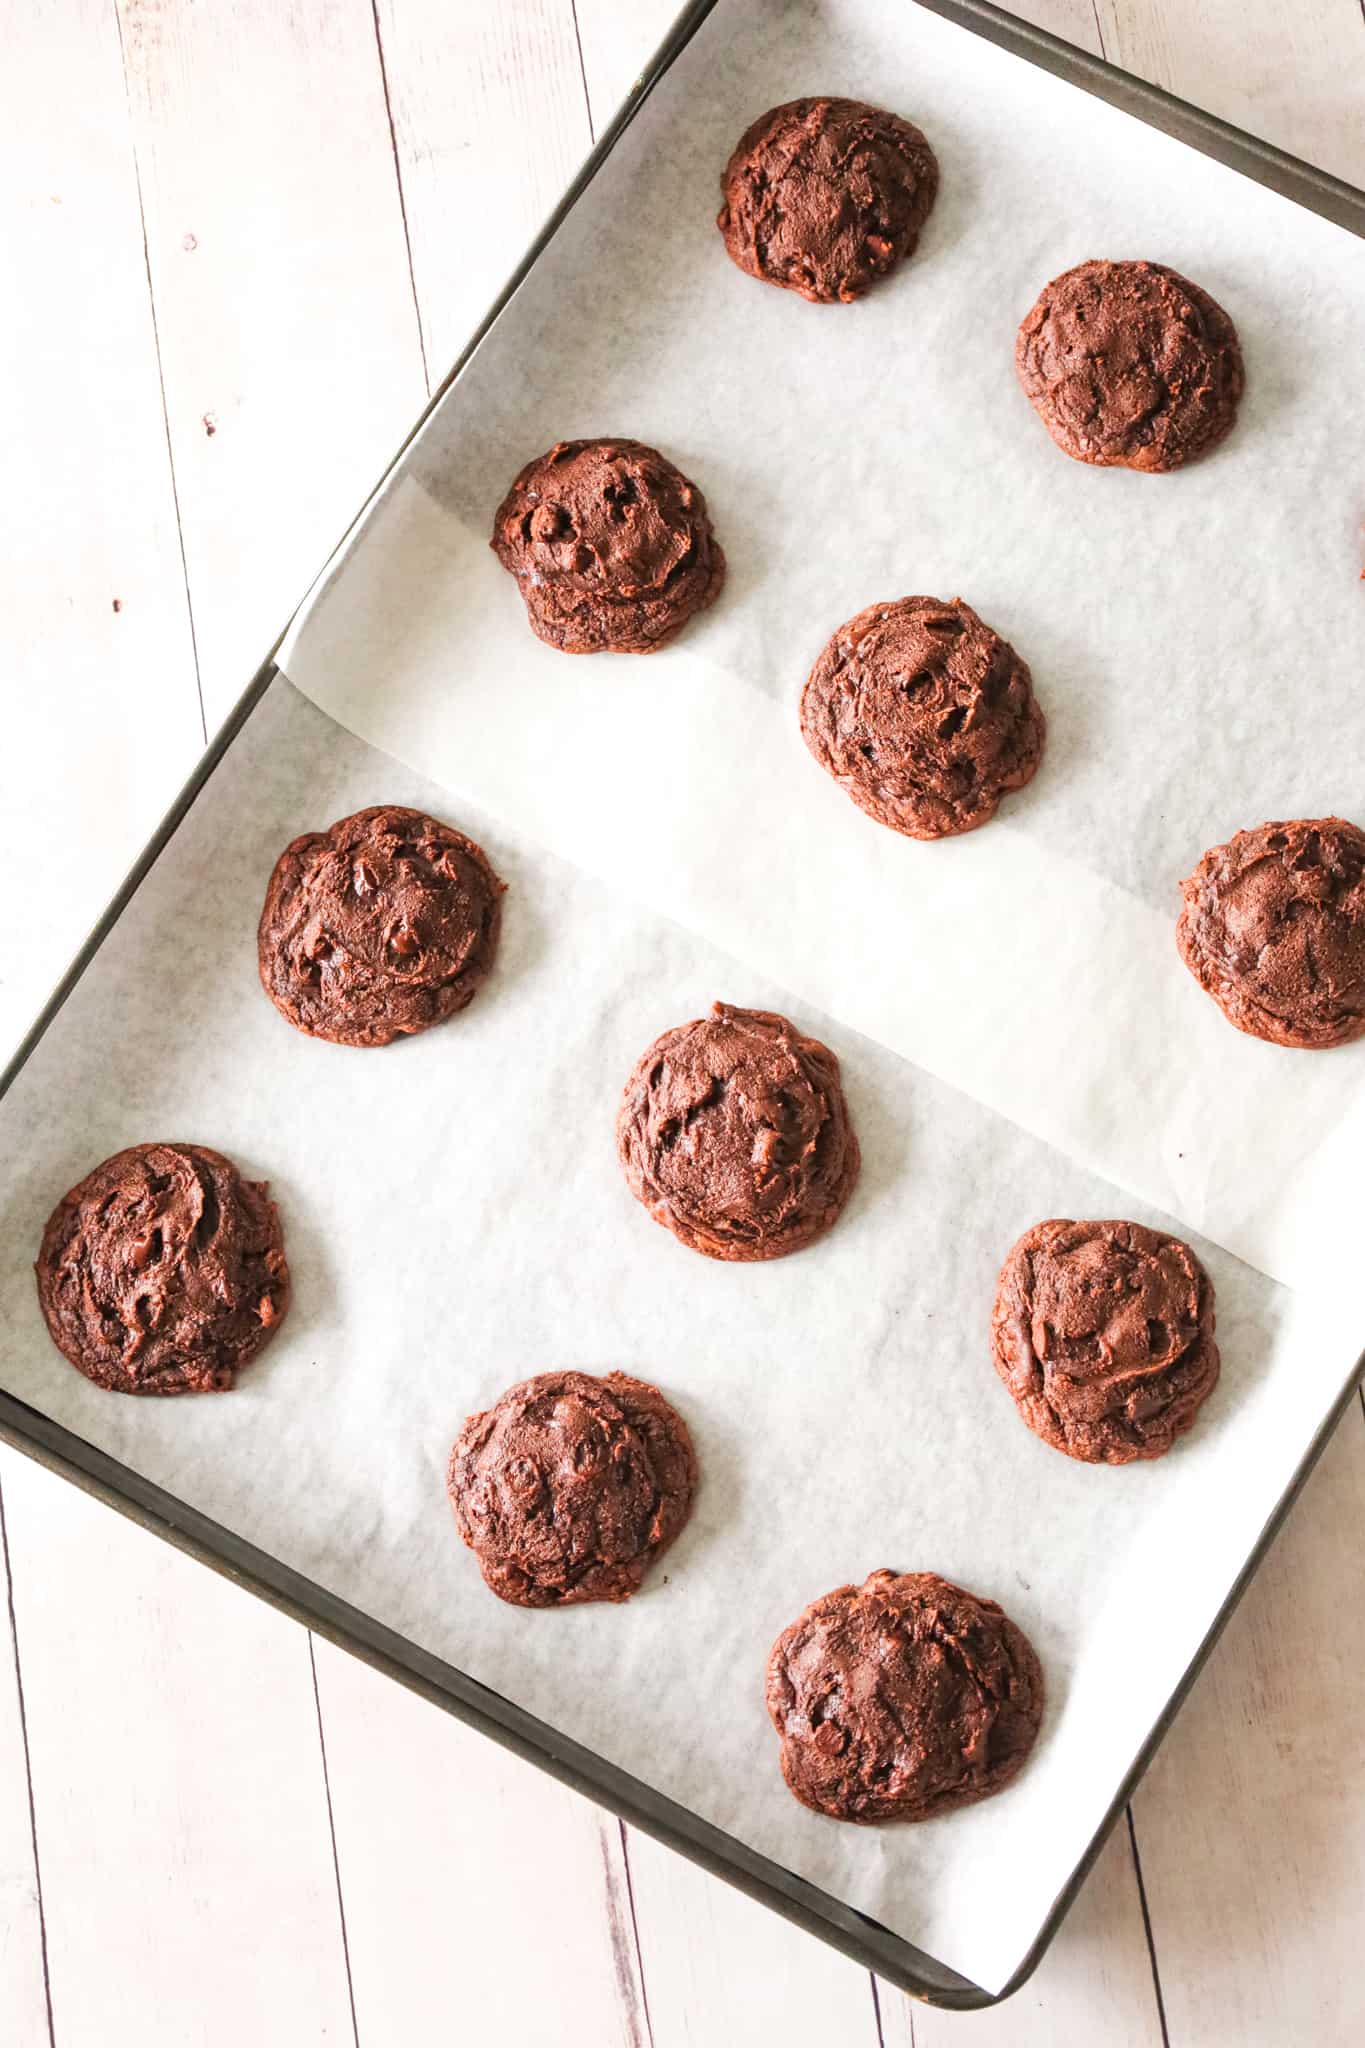 Brownie Mix Cookies are an easy chocolate cookie recipe using boxed brownie mix and loaded with chocolate chips.